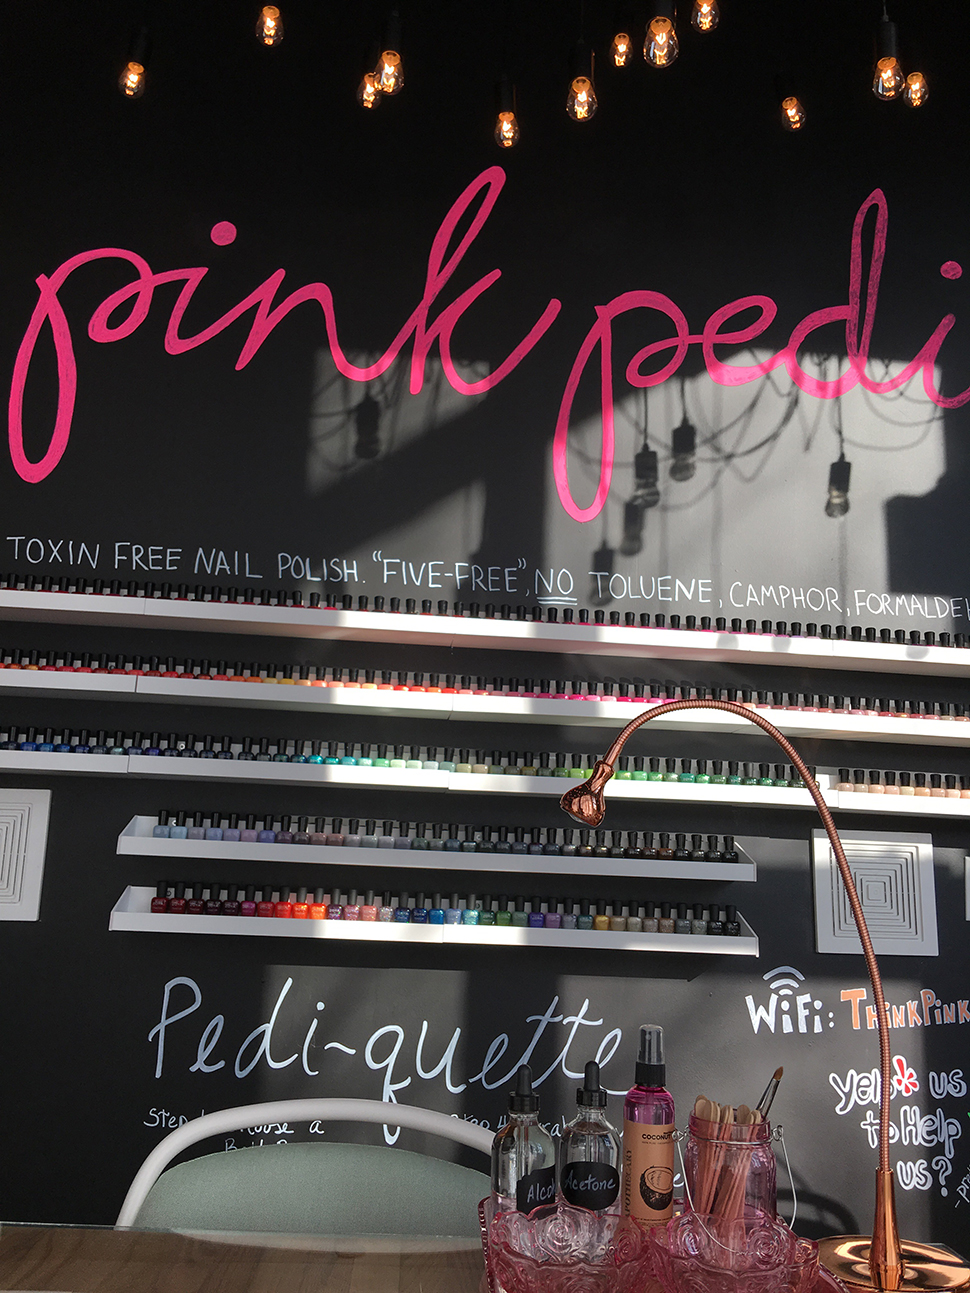 Pink Pedi is the first nail salon in Dallas to exclusively carry the entire nail polish lines of OPI’s Infinite Shine hybrid polish collection and Zoya, a polish line free of all cancer-causing chemicals commonly found in nail polish.